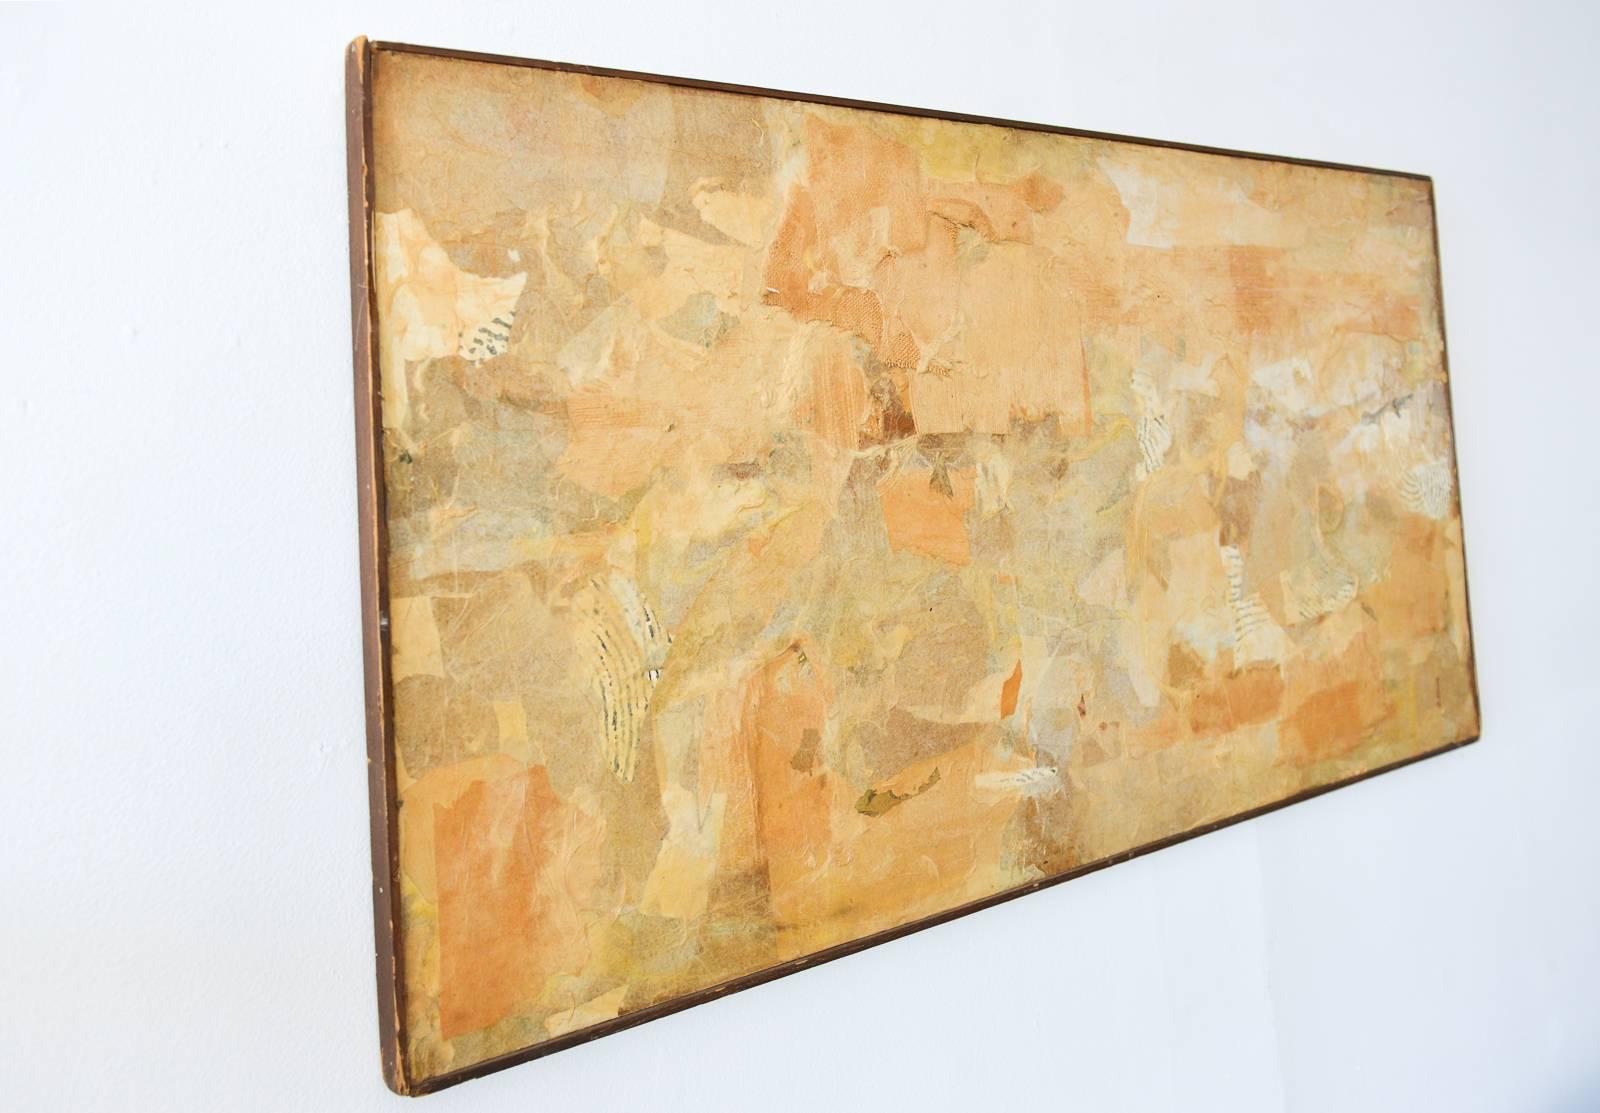 Burlap Abstract Mixed-Media Collage by California Artist Don Werner, circa 1968